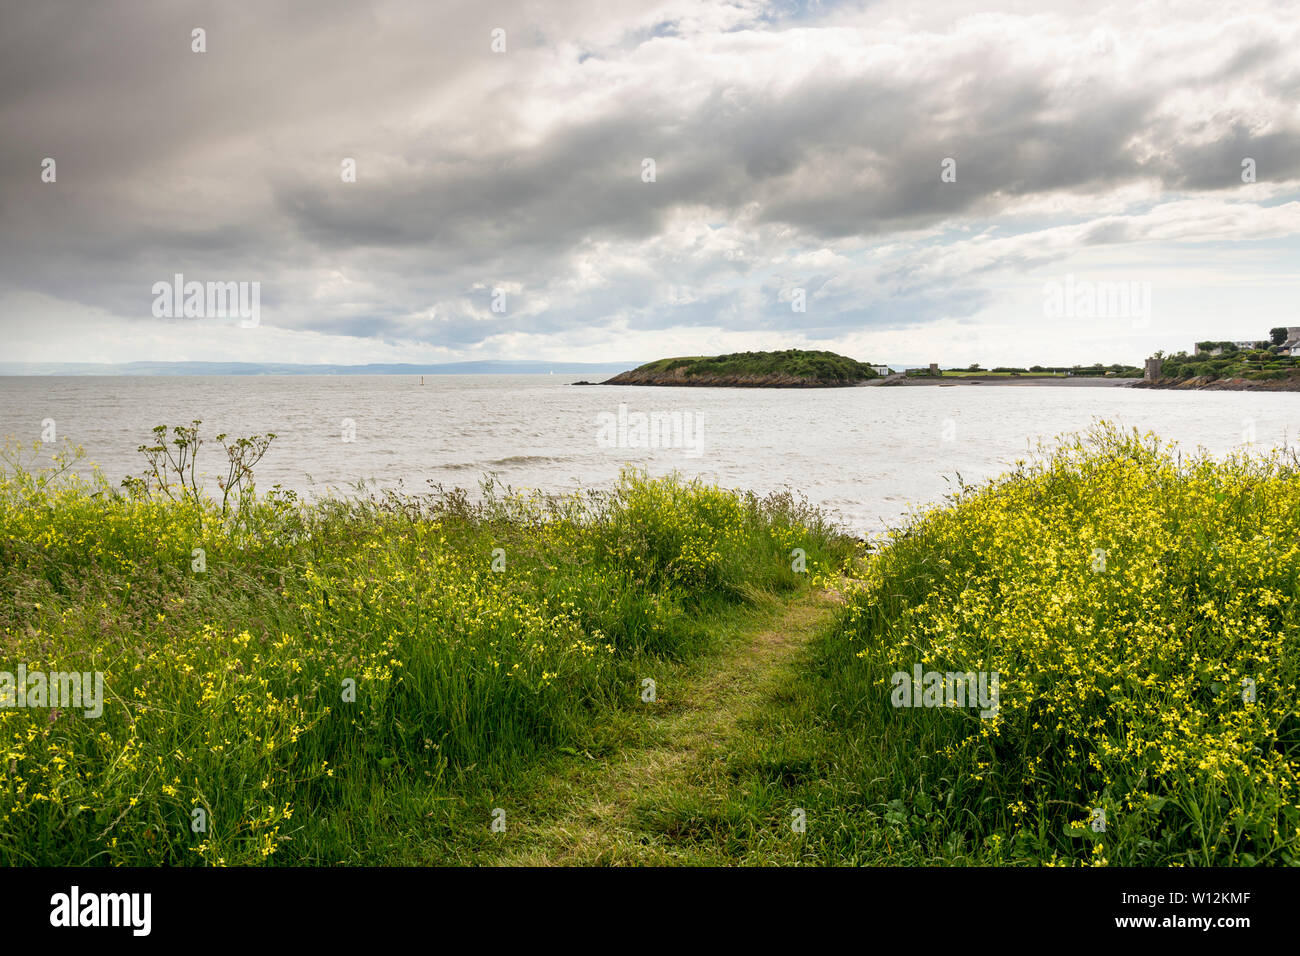 In the foreground a path goes through yellow wild flowers beyond which Cold Knap Point, South Wales, juts out into the Bristol Channel on a cloudy day Stock Photo